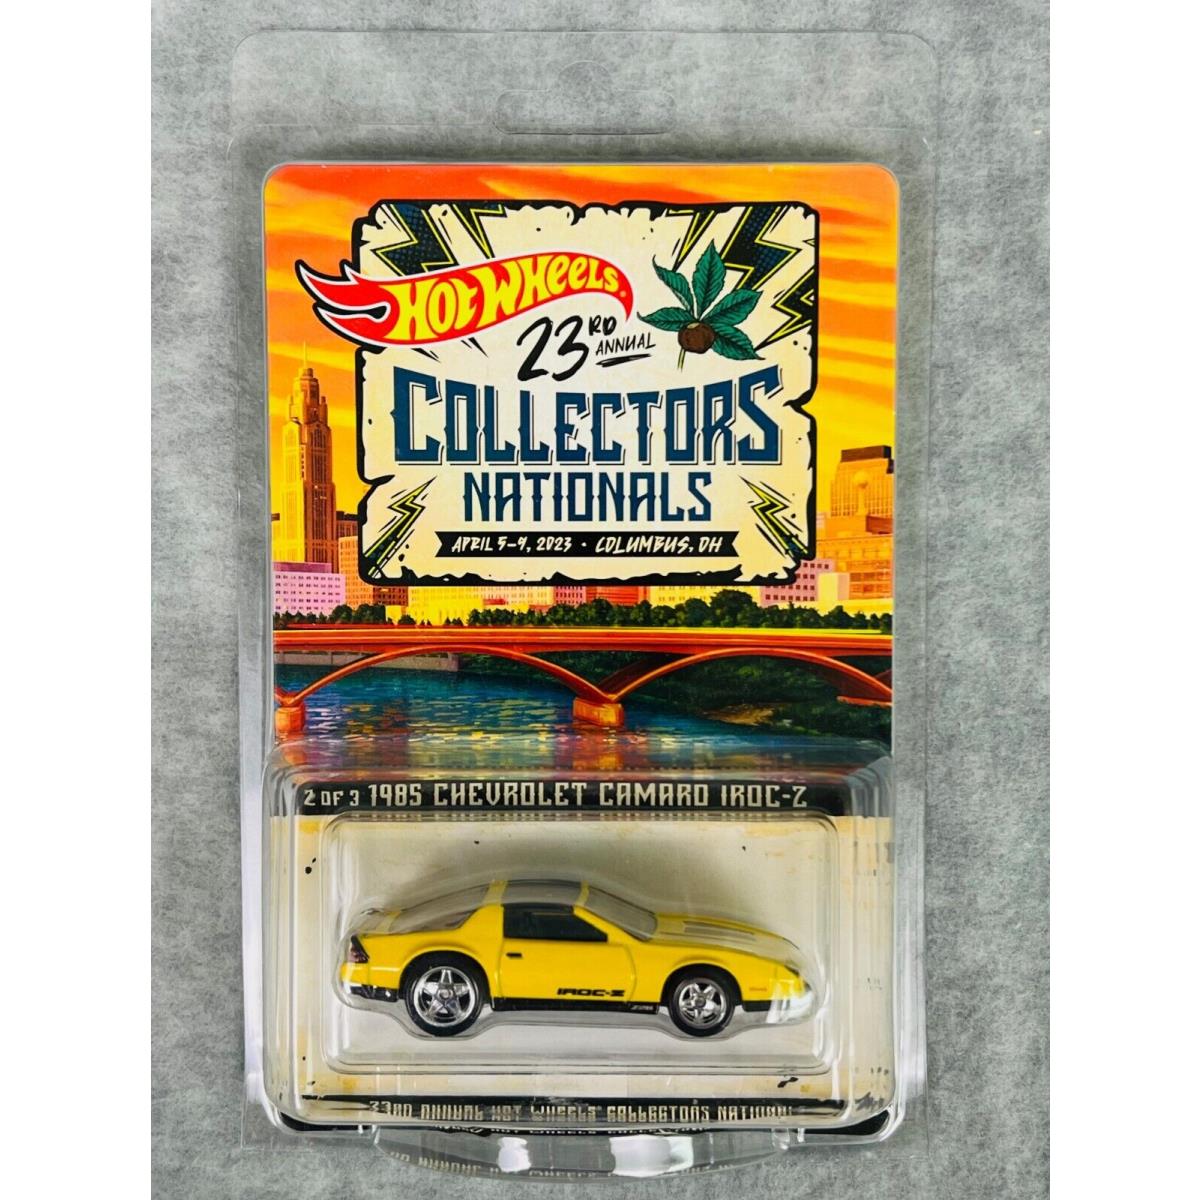 Hot Wheels 23rd Annual Collectors Nationals 1985 Chevrolet Camaro Iroc-z H11